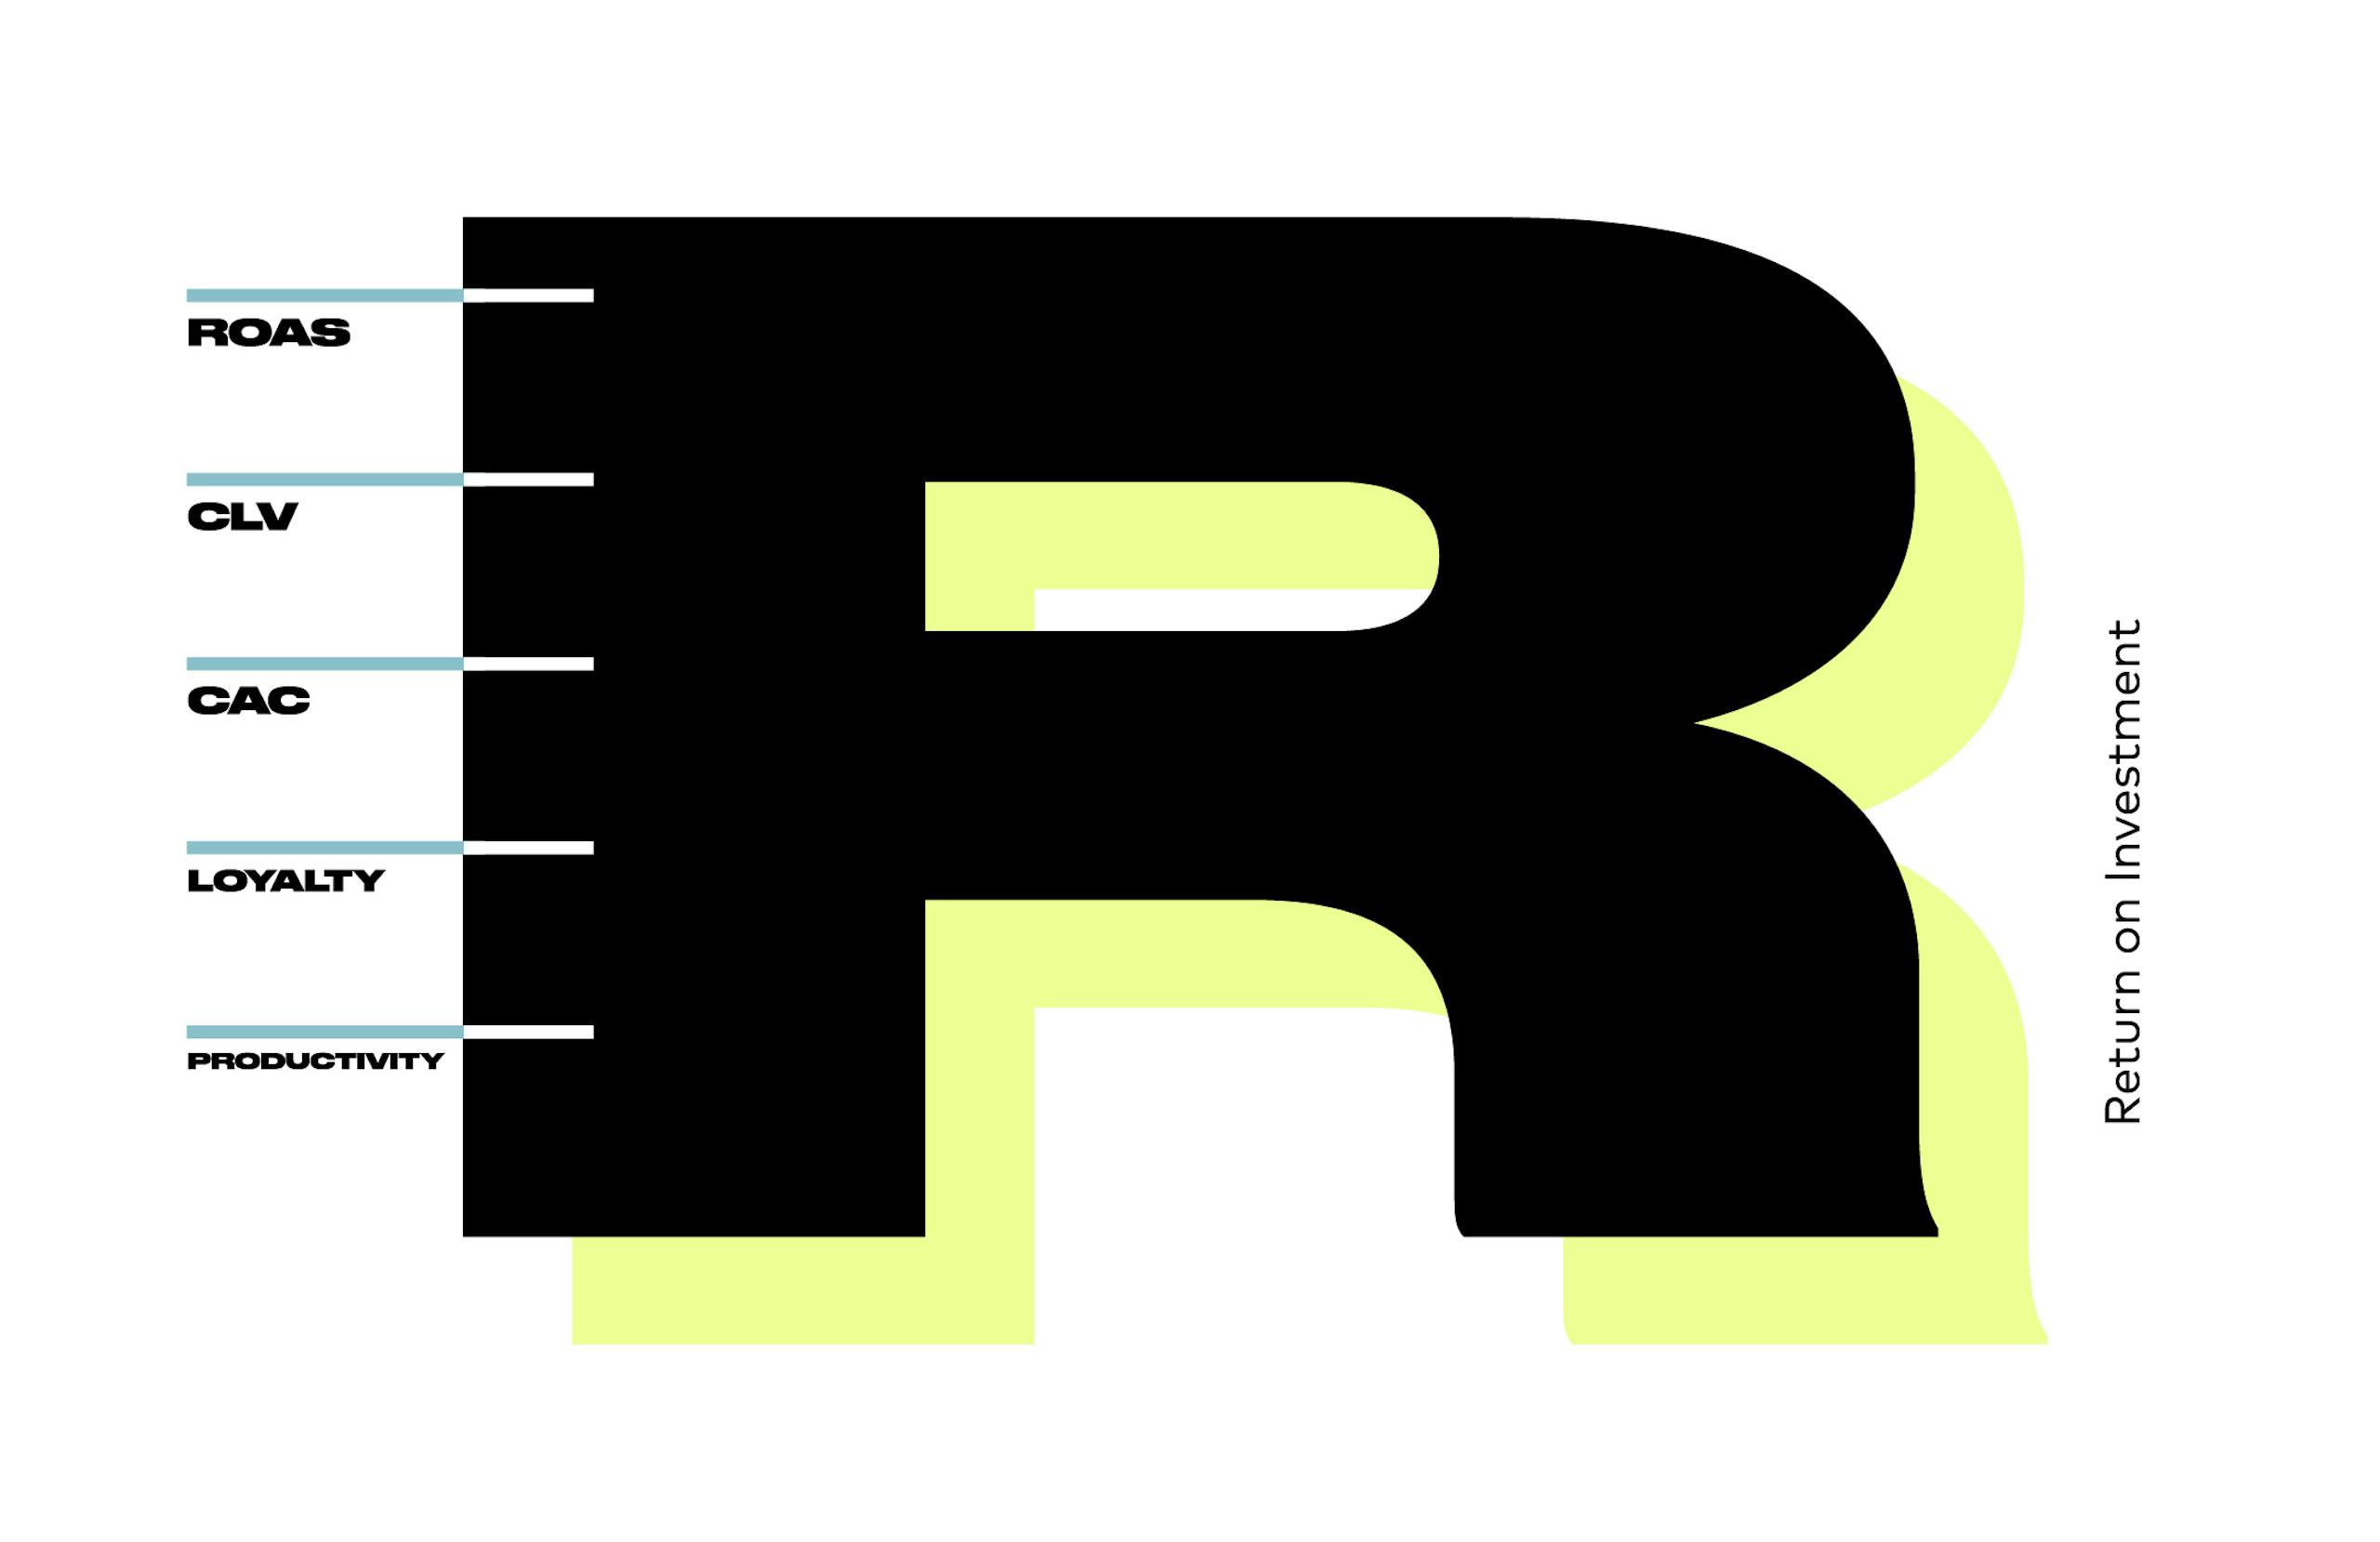 The letter R illustrated